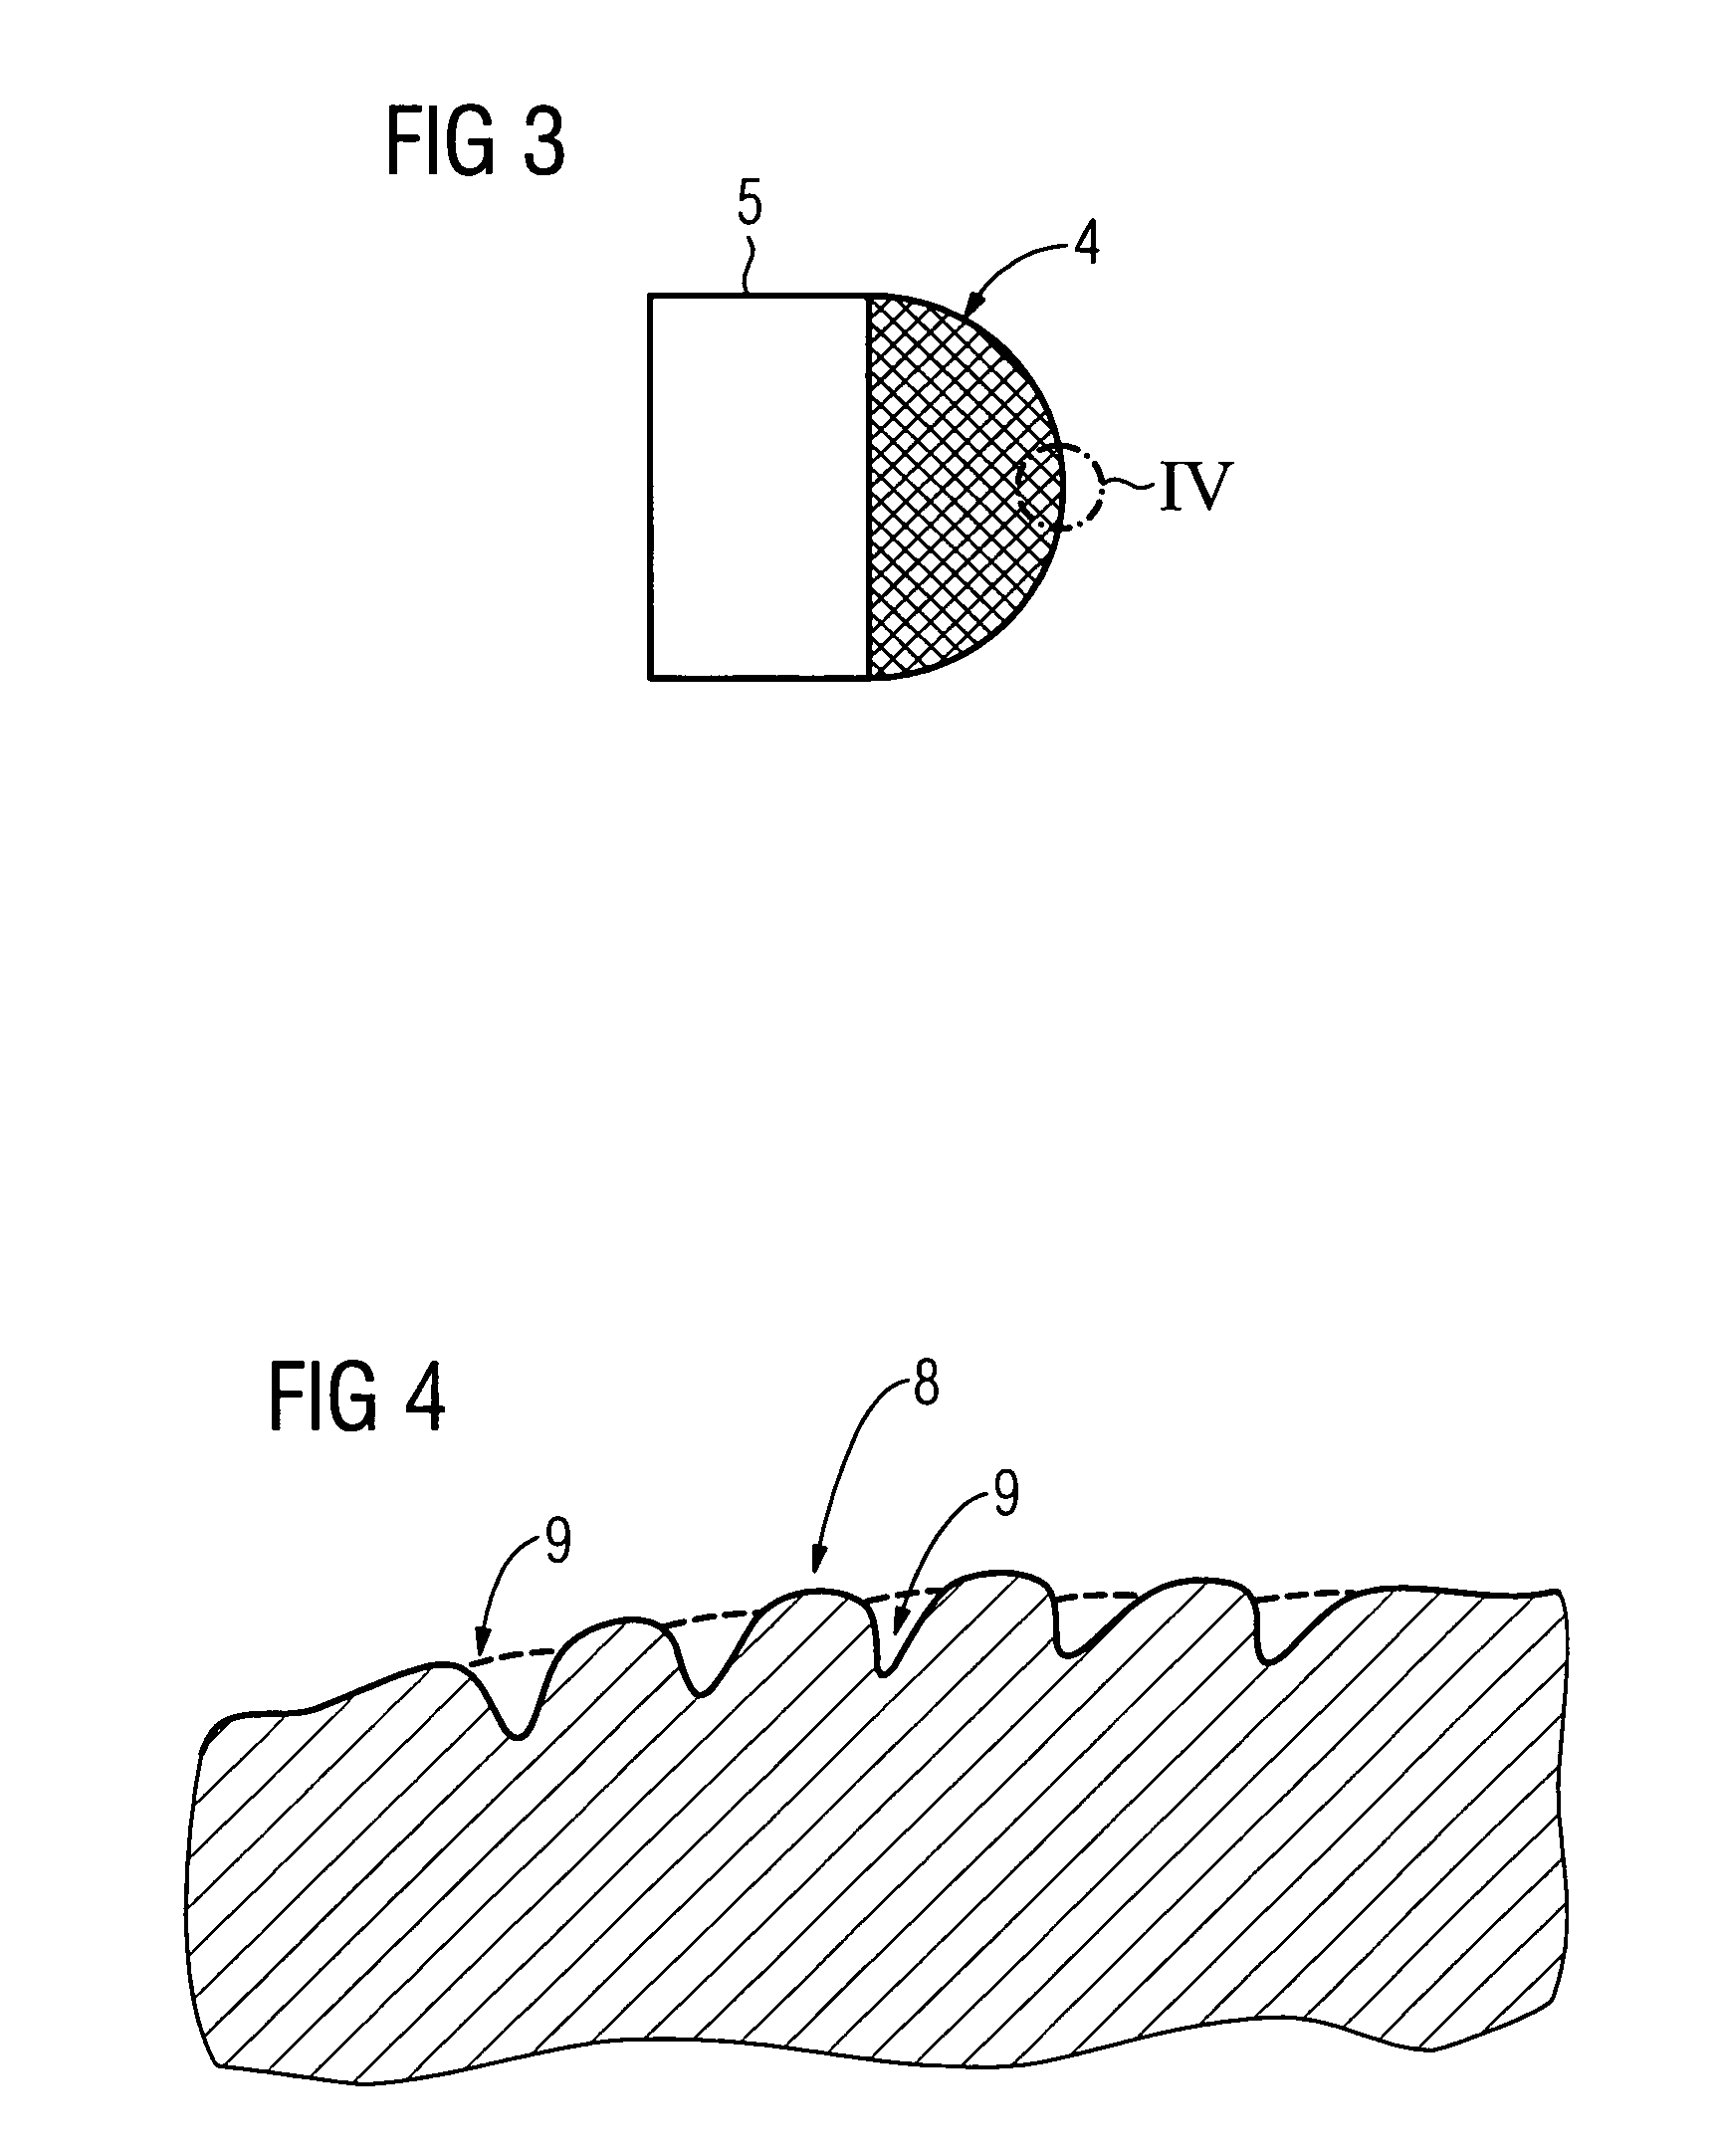 Intravenous pacemaker electrode